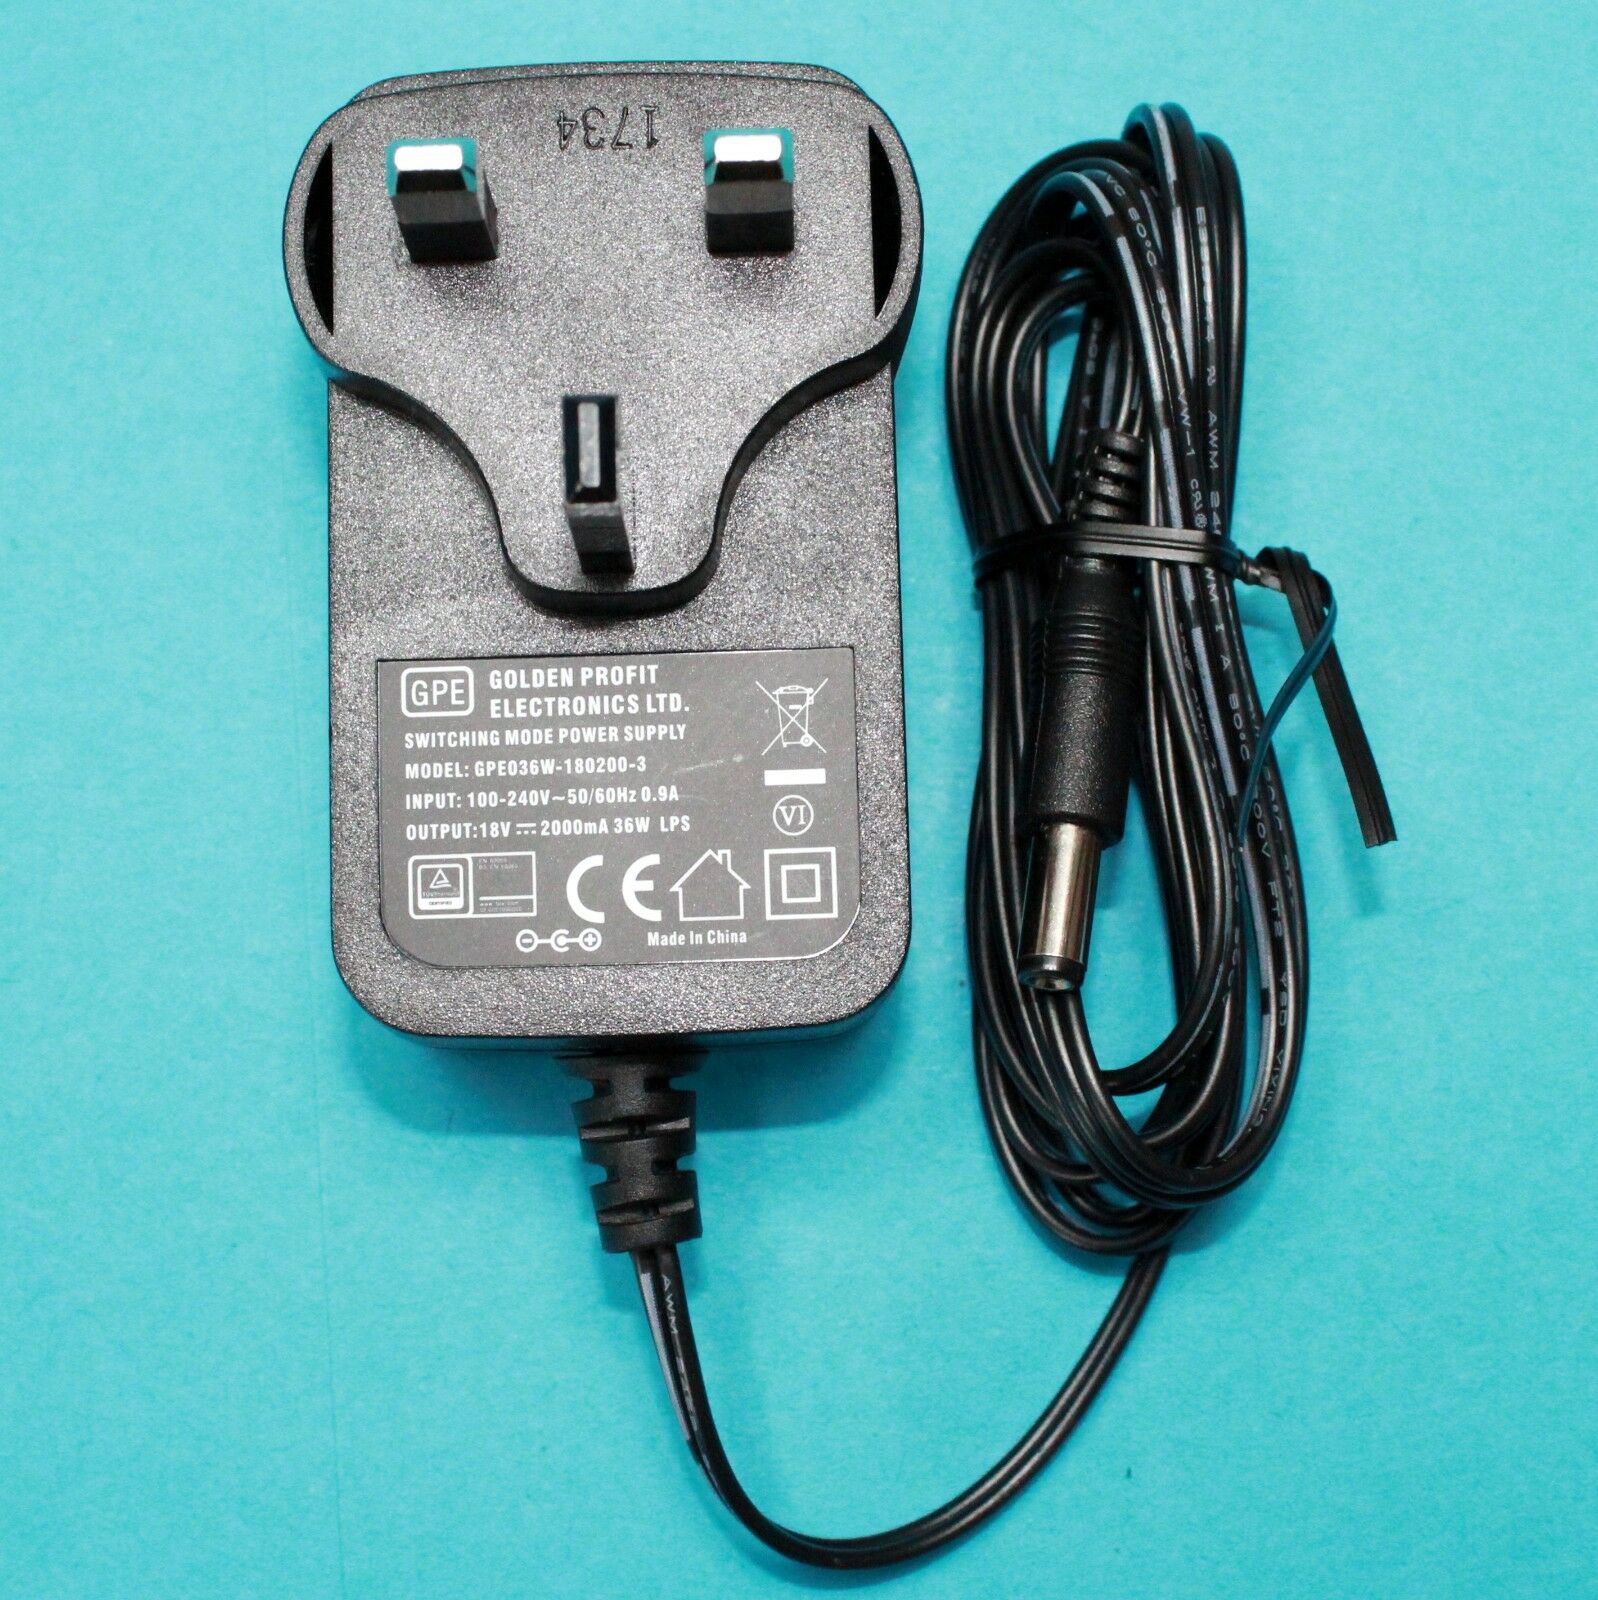 New GPE GPE036W-180200-3 Power Adapter ac adapter 18V DC 2000mA 36W